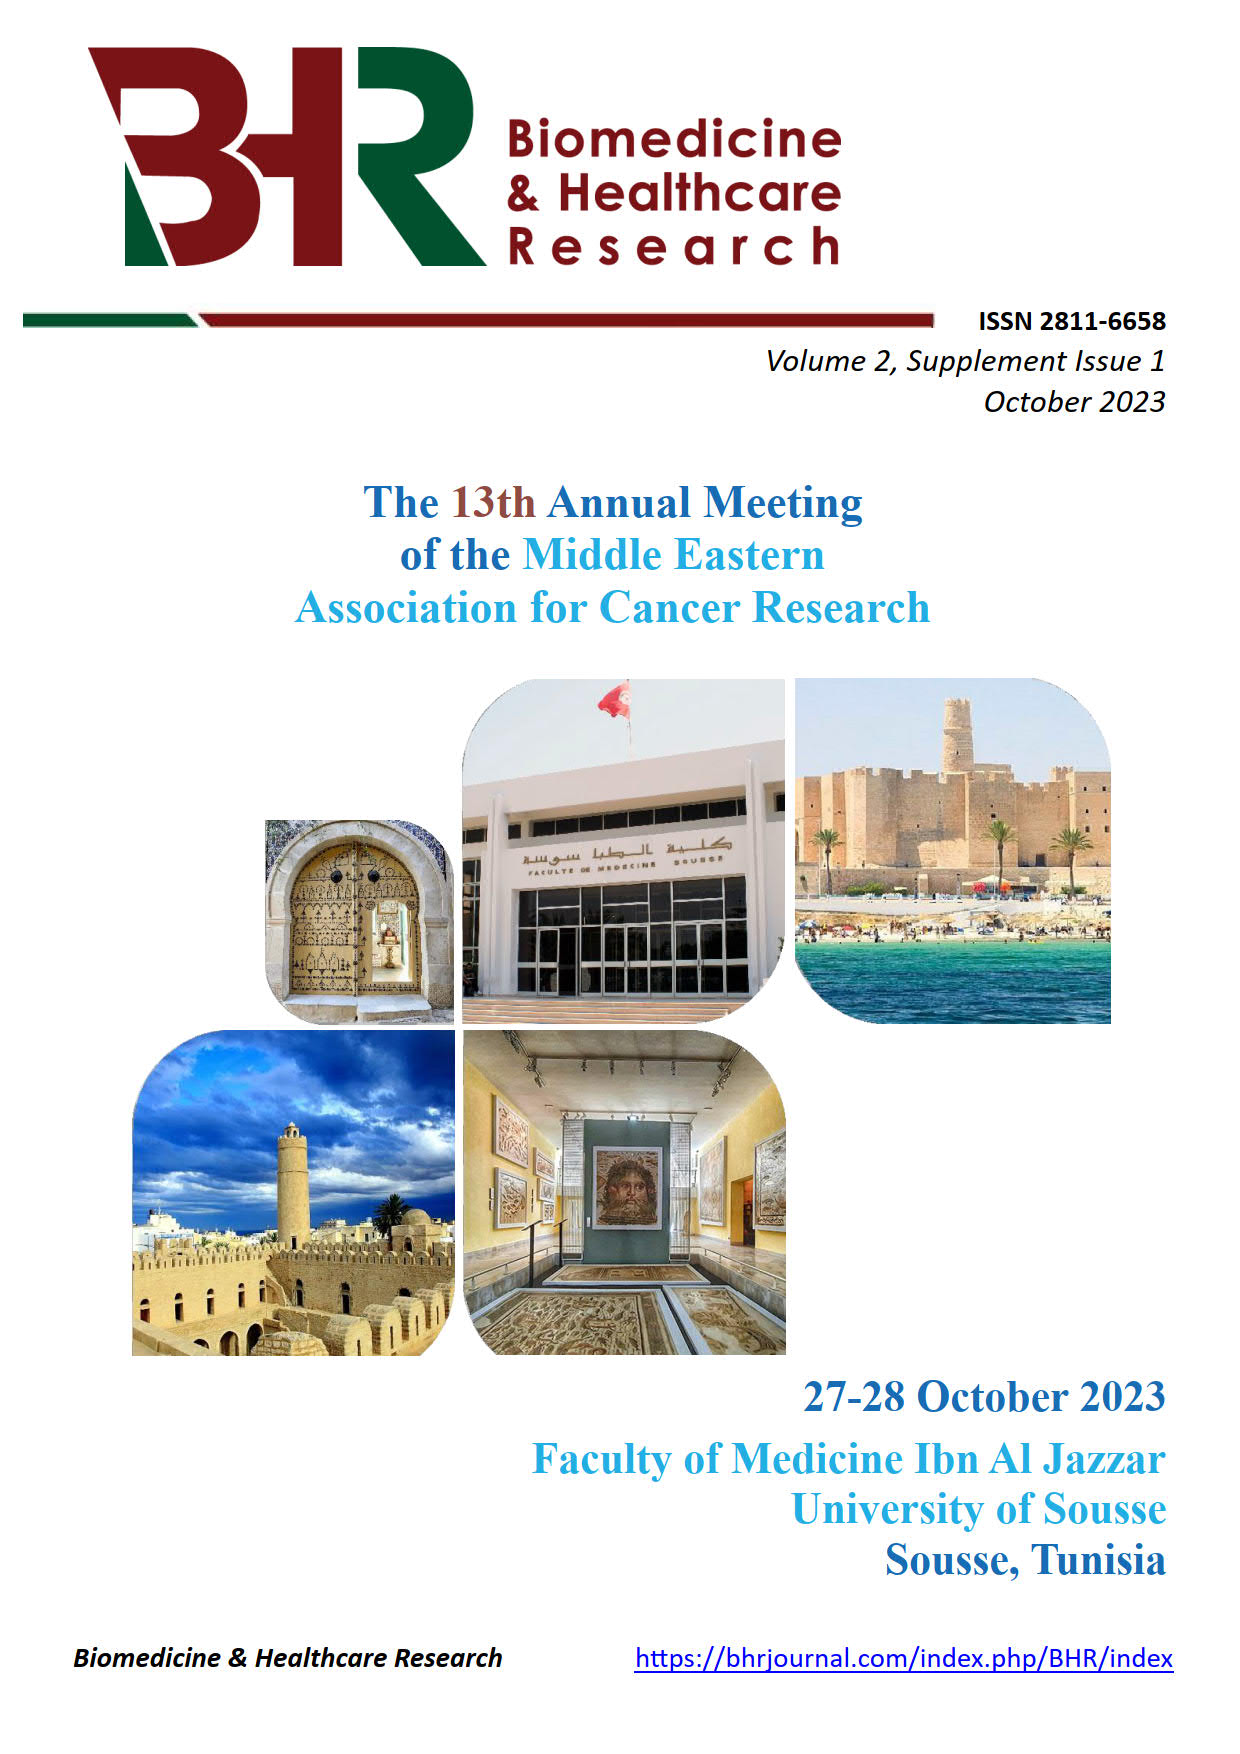 					View Vol. 2 No. Supplement issue 1 (2023): 13th Annual Meeting of the Middle Eastern Association for Cancer Research (MEACR) - Abstracts
				